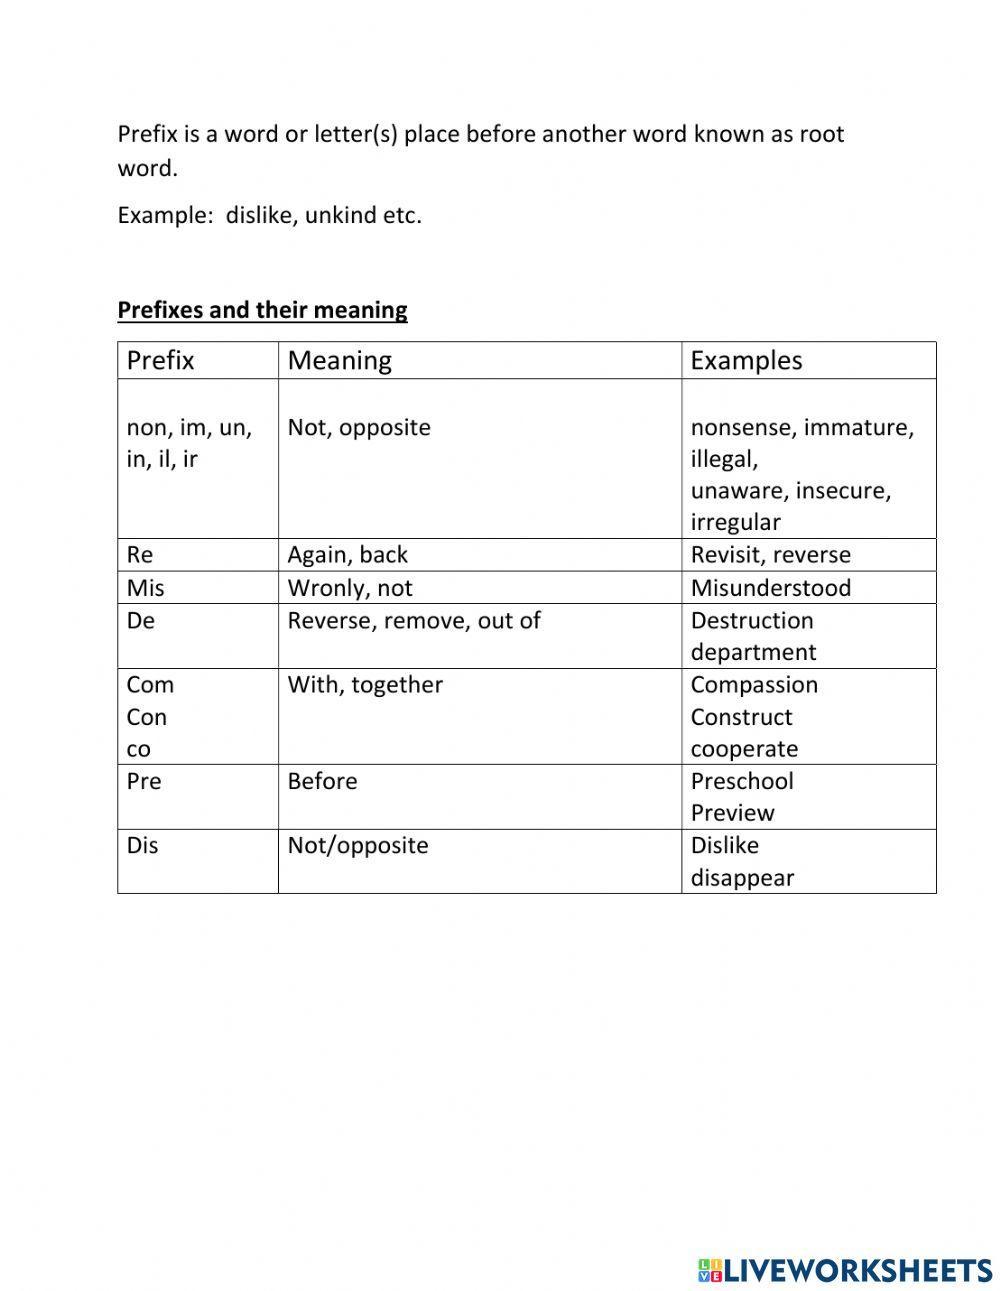 Prefixes Meand and Examples